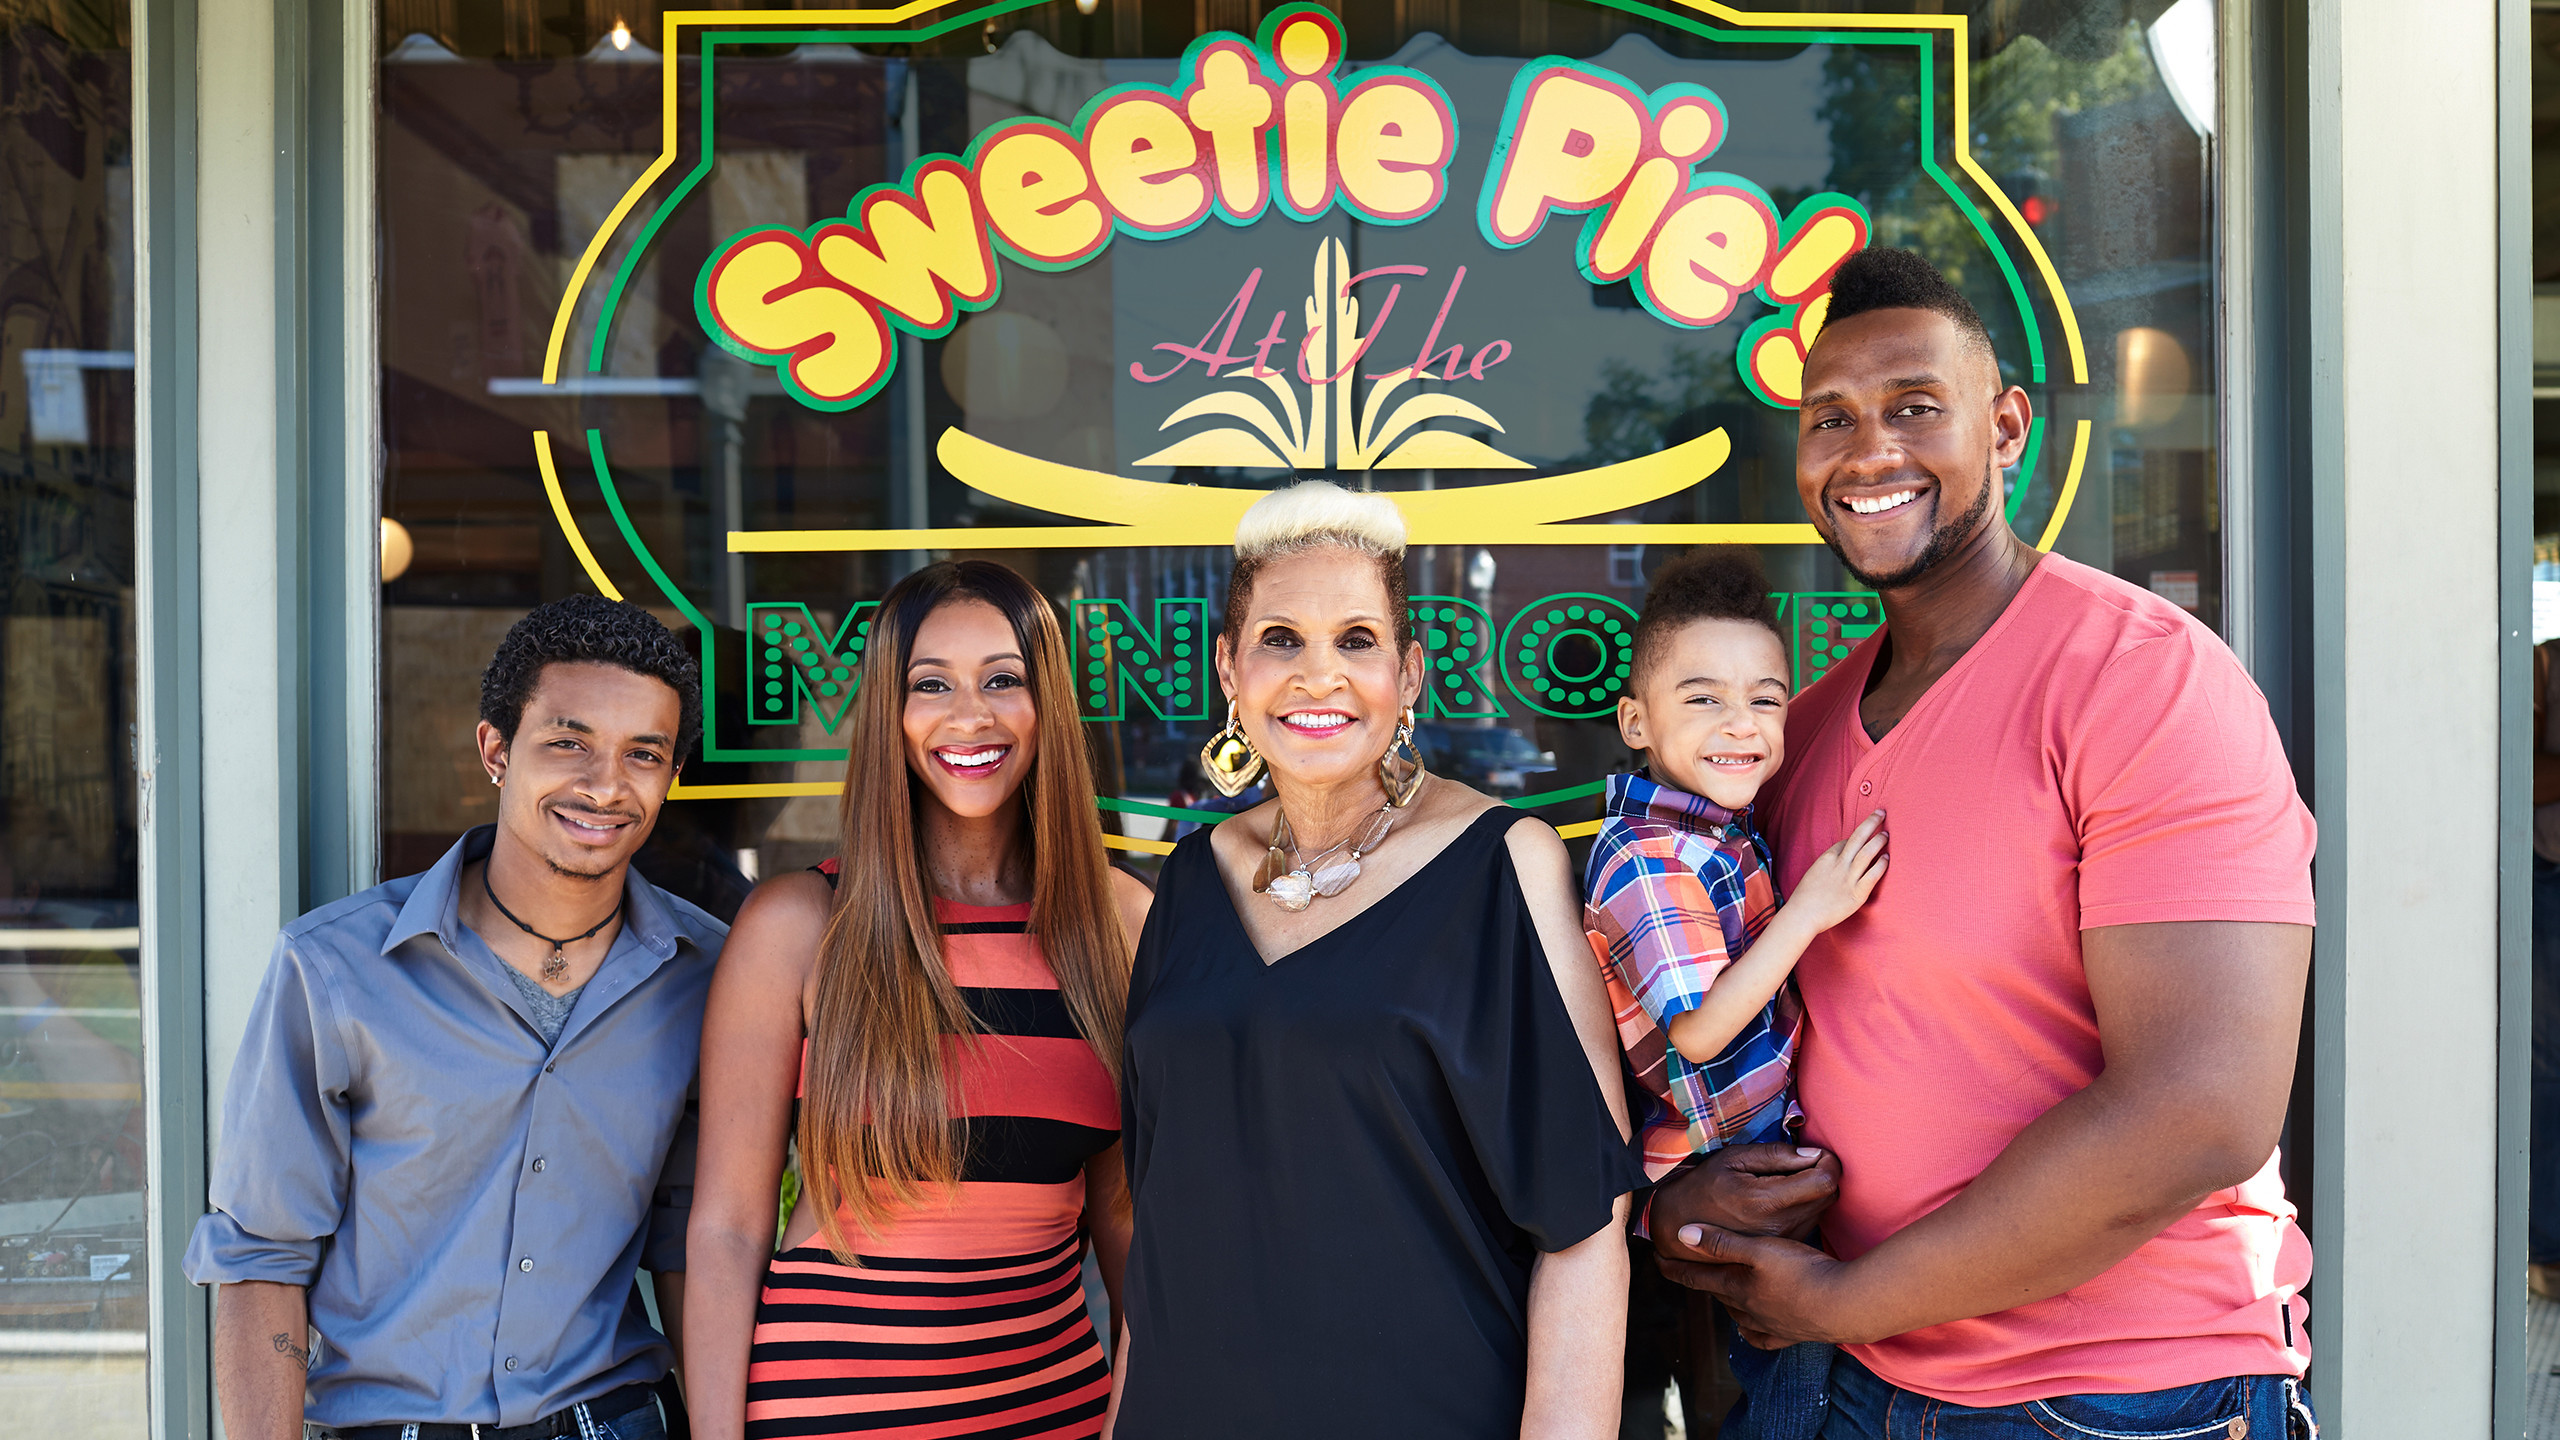 welcome to sweetie pies video